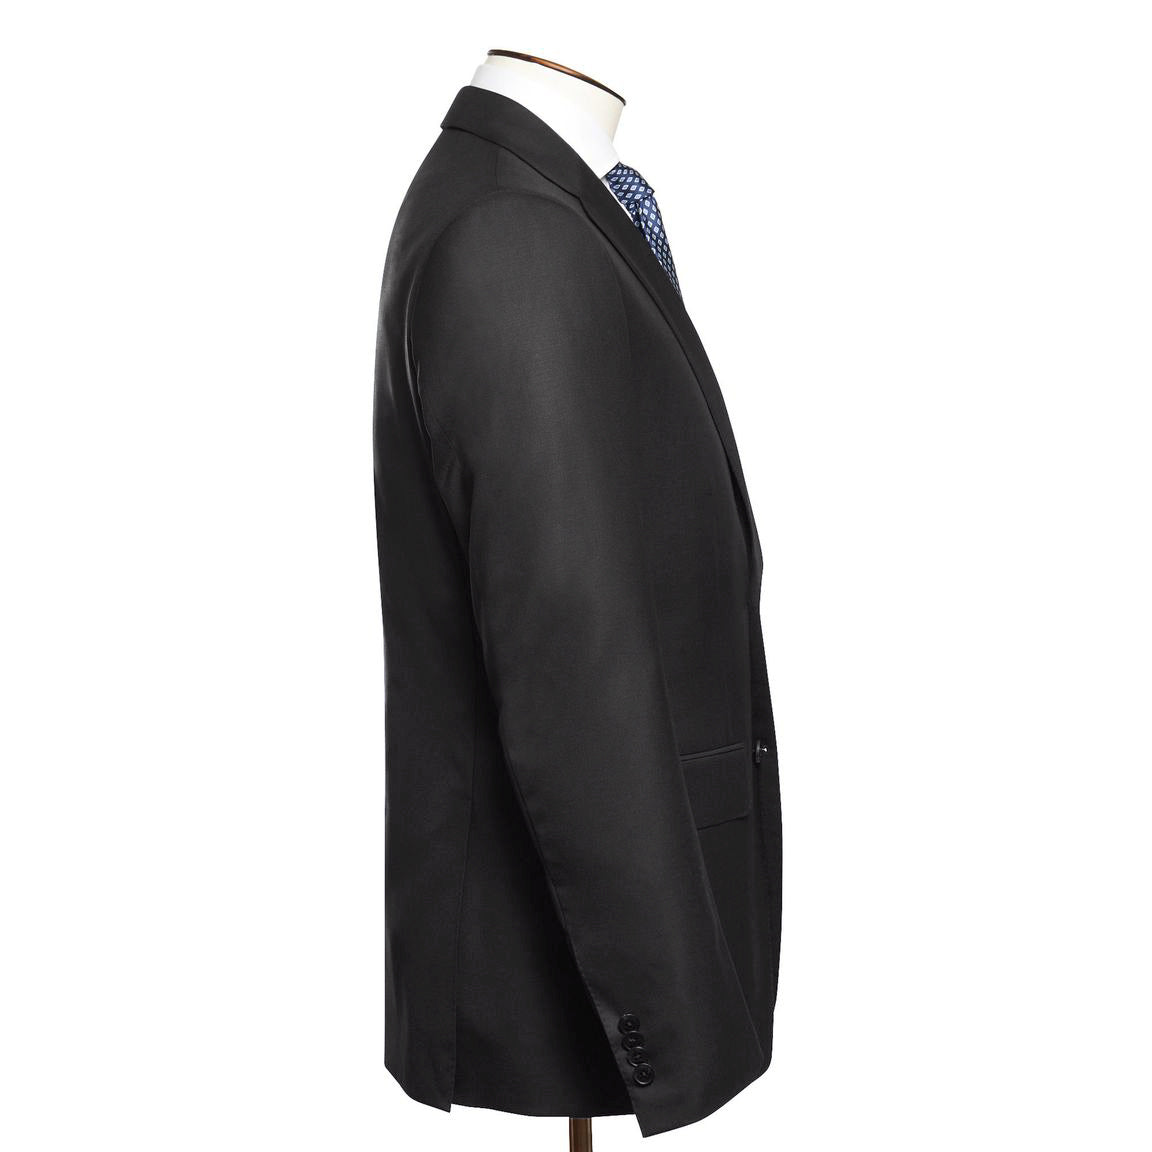 Charcoal Twill Single Breasted Serchio Suit